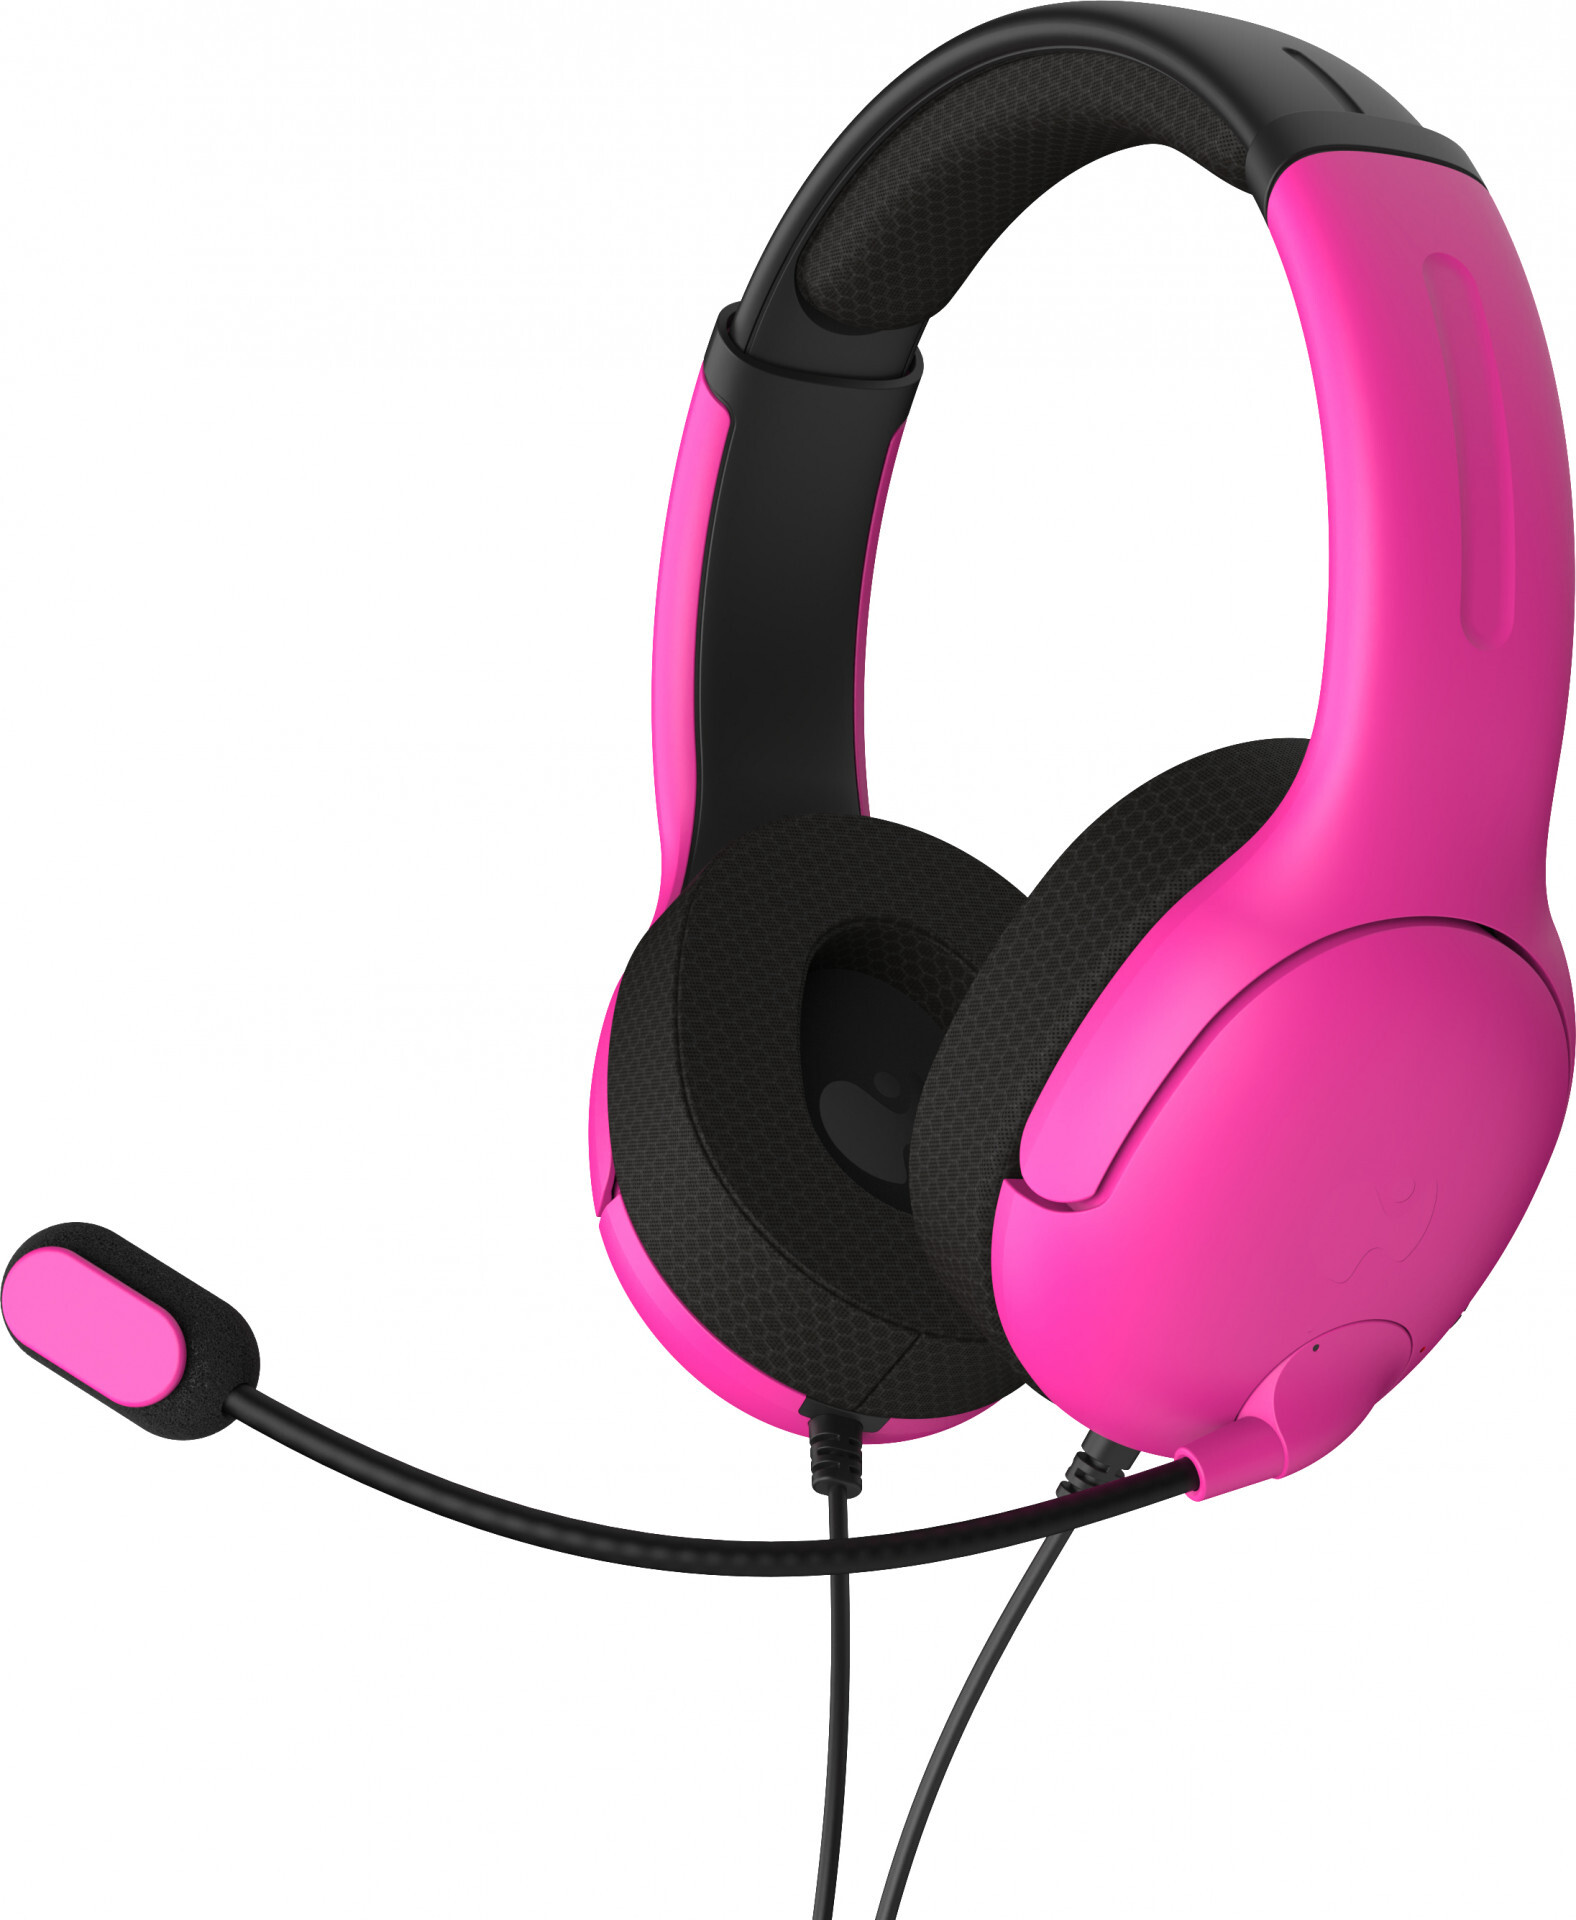 PDP PDP Gaming Airlite Wired Stereo Headset - Nebula Pink